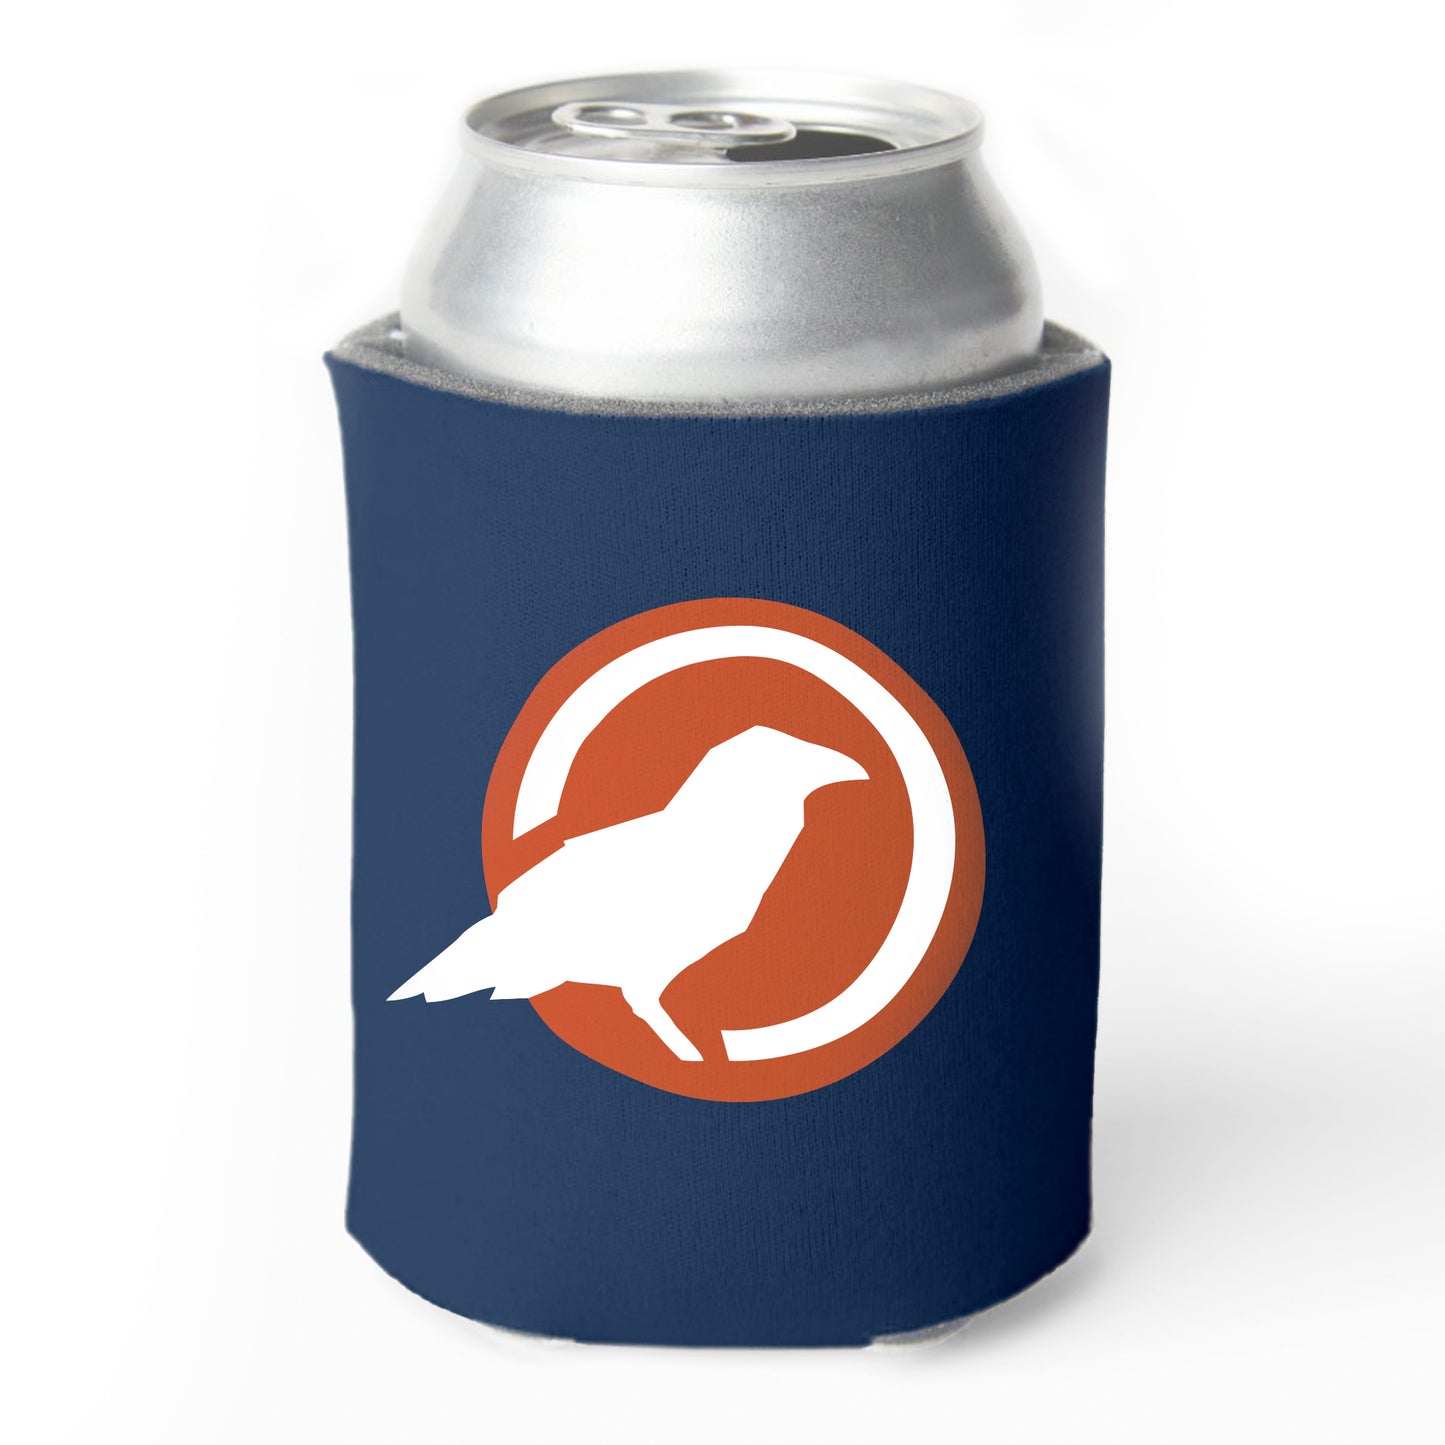 A blue Rustic County Can Cooler featuring a white and orange circular logo with a stylized bird silhouette, designed to insulate a 12 oz beverage can.